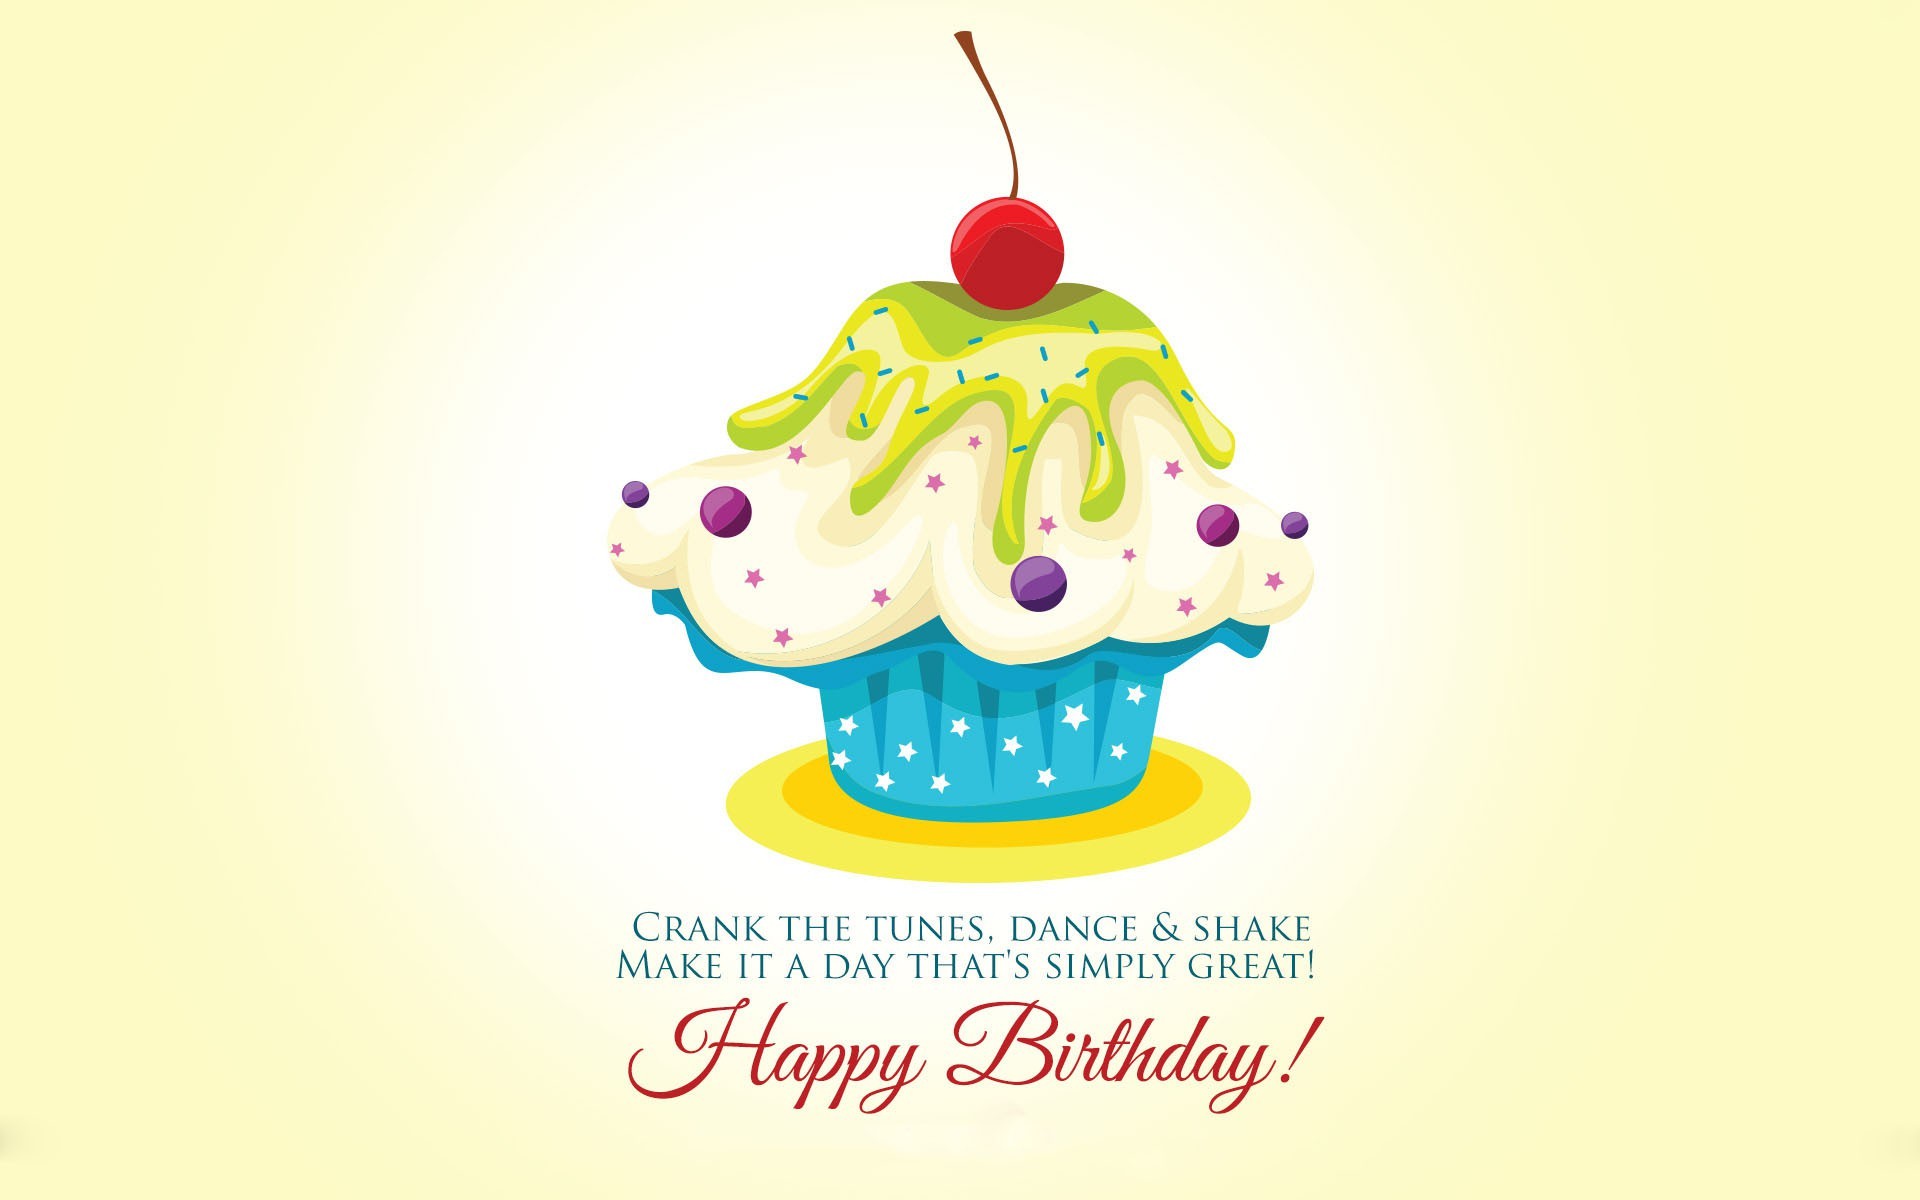 Happy Birthday Wishes Quote Hd Wallpaper Background - Birthday Greeting  Background Hd - 1920x1200 Wallpaper 